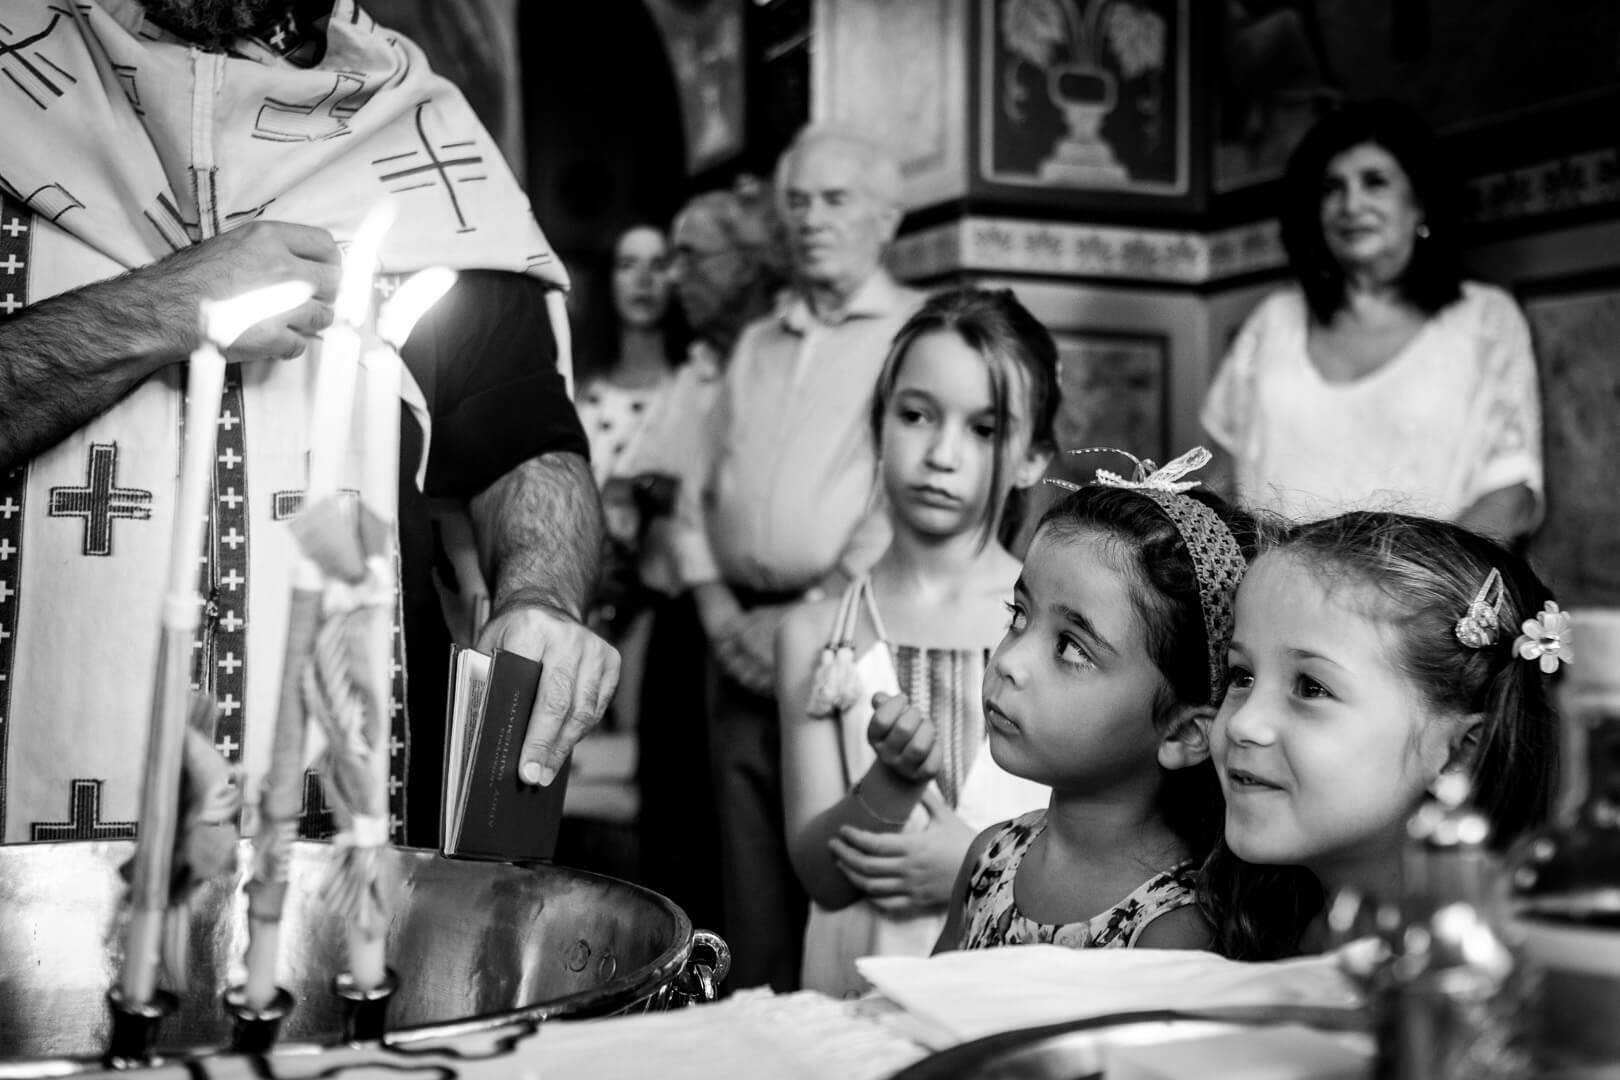 Wide-eyed wonder: children observe the priest blessing water during a religious ceremony.